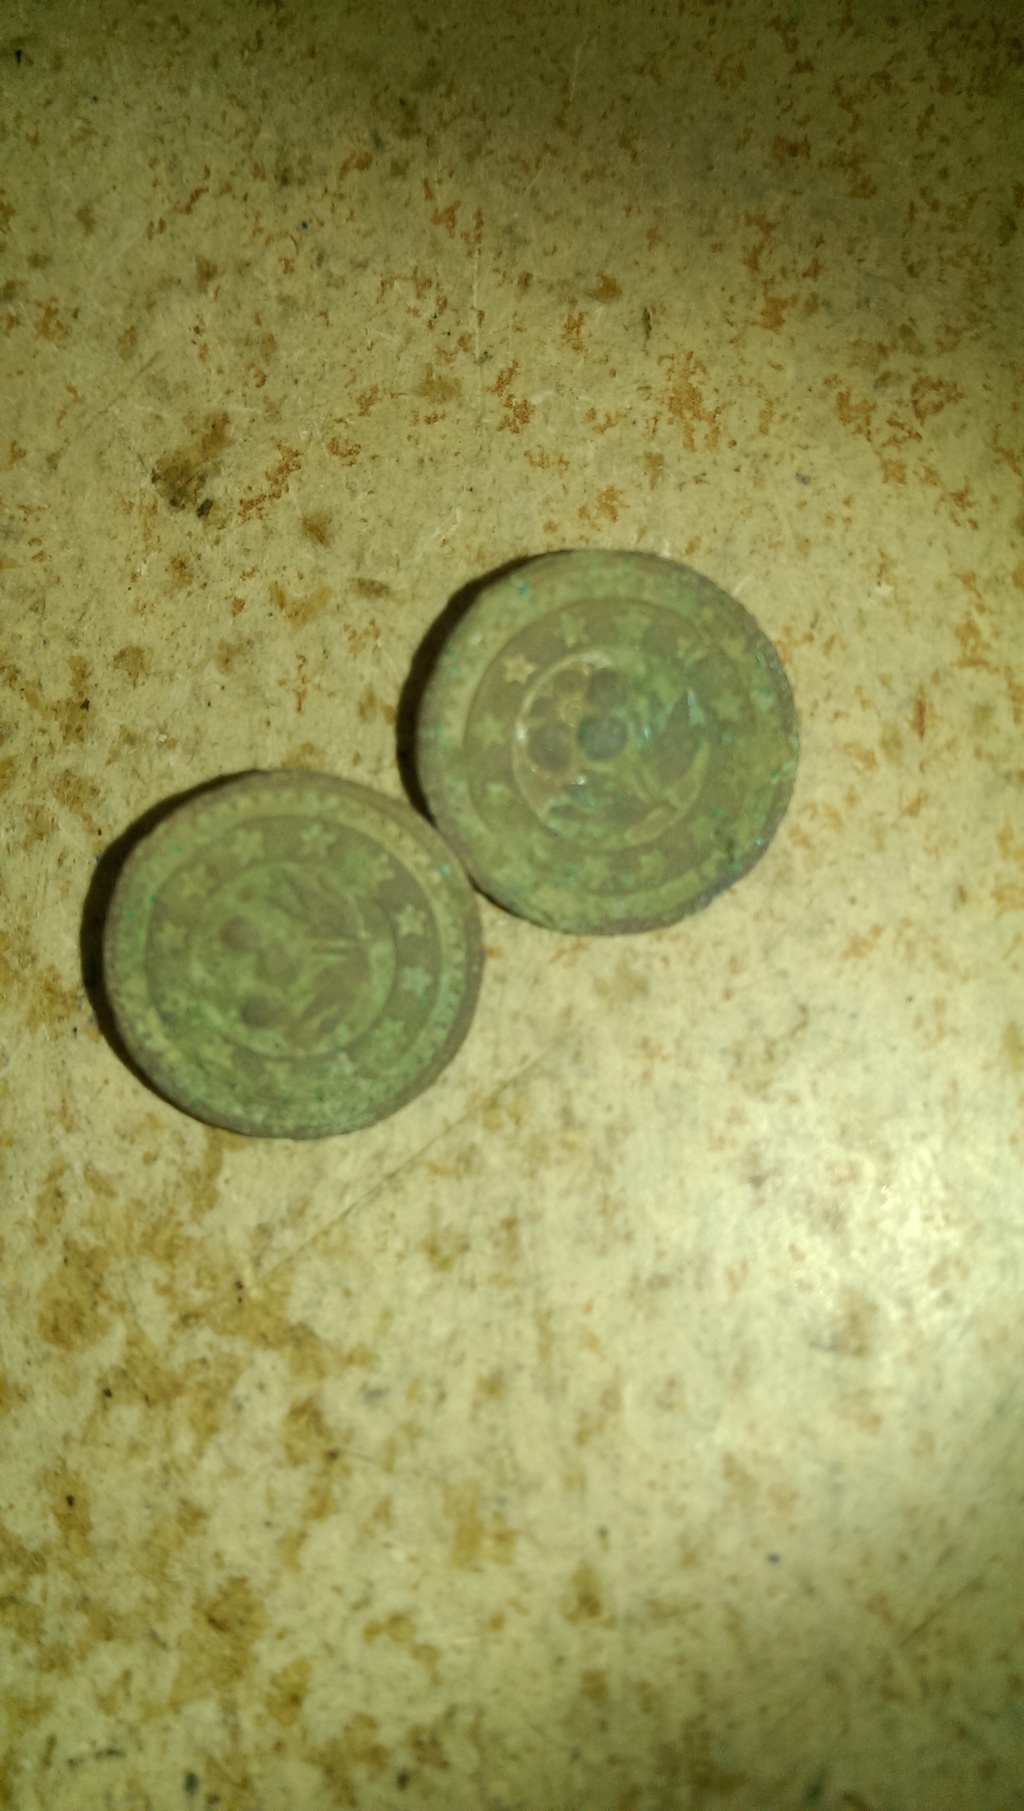 boutons manchette militaire ? Imag0232